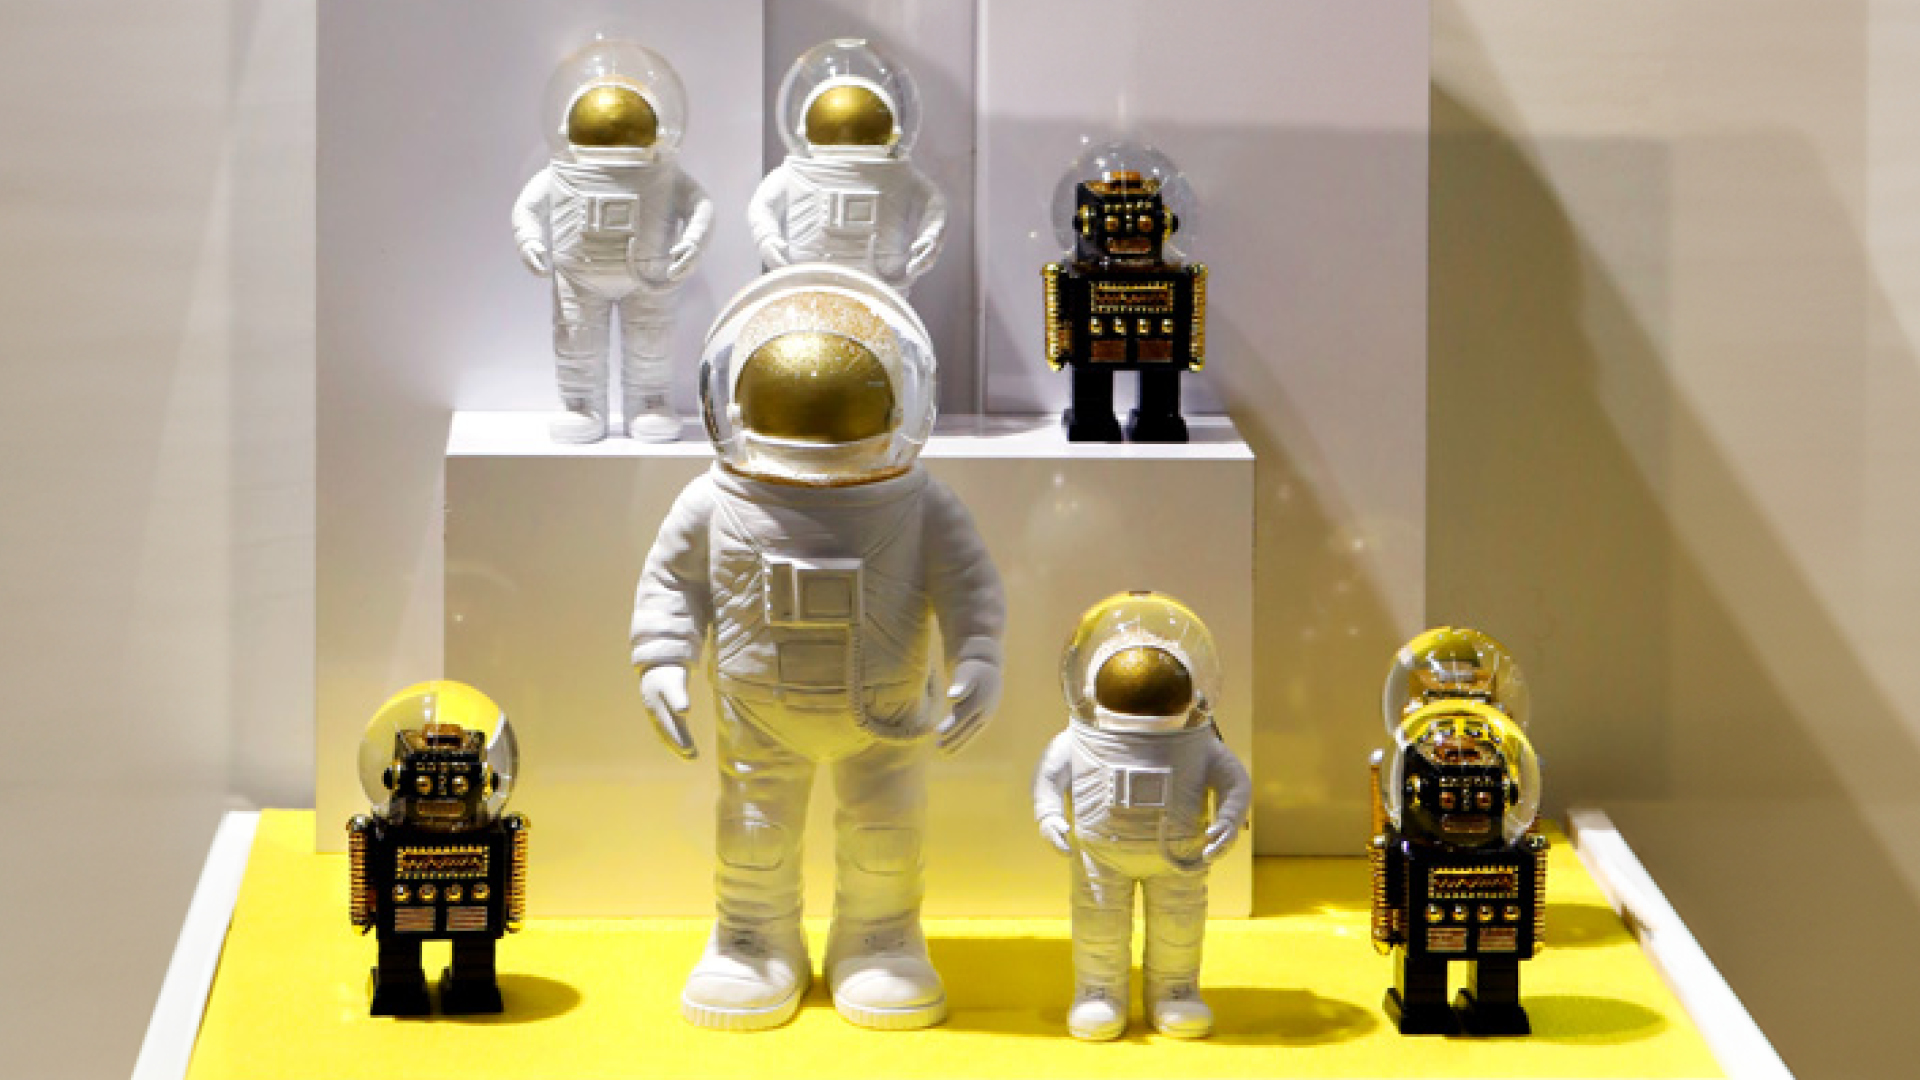 Astronauts as figures at Ambiente